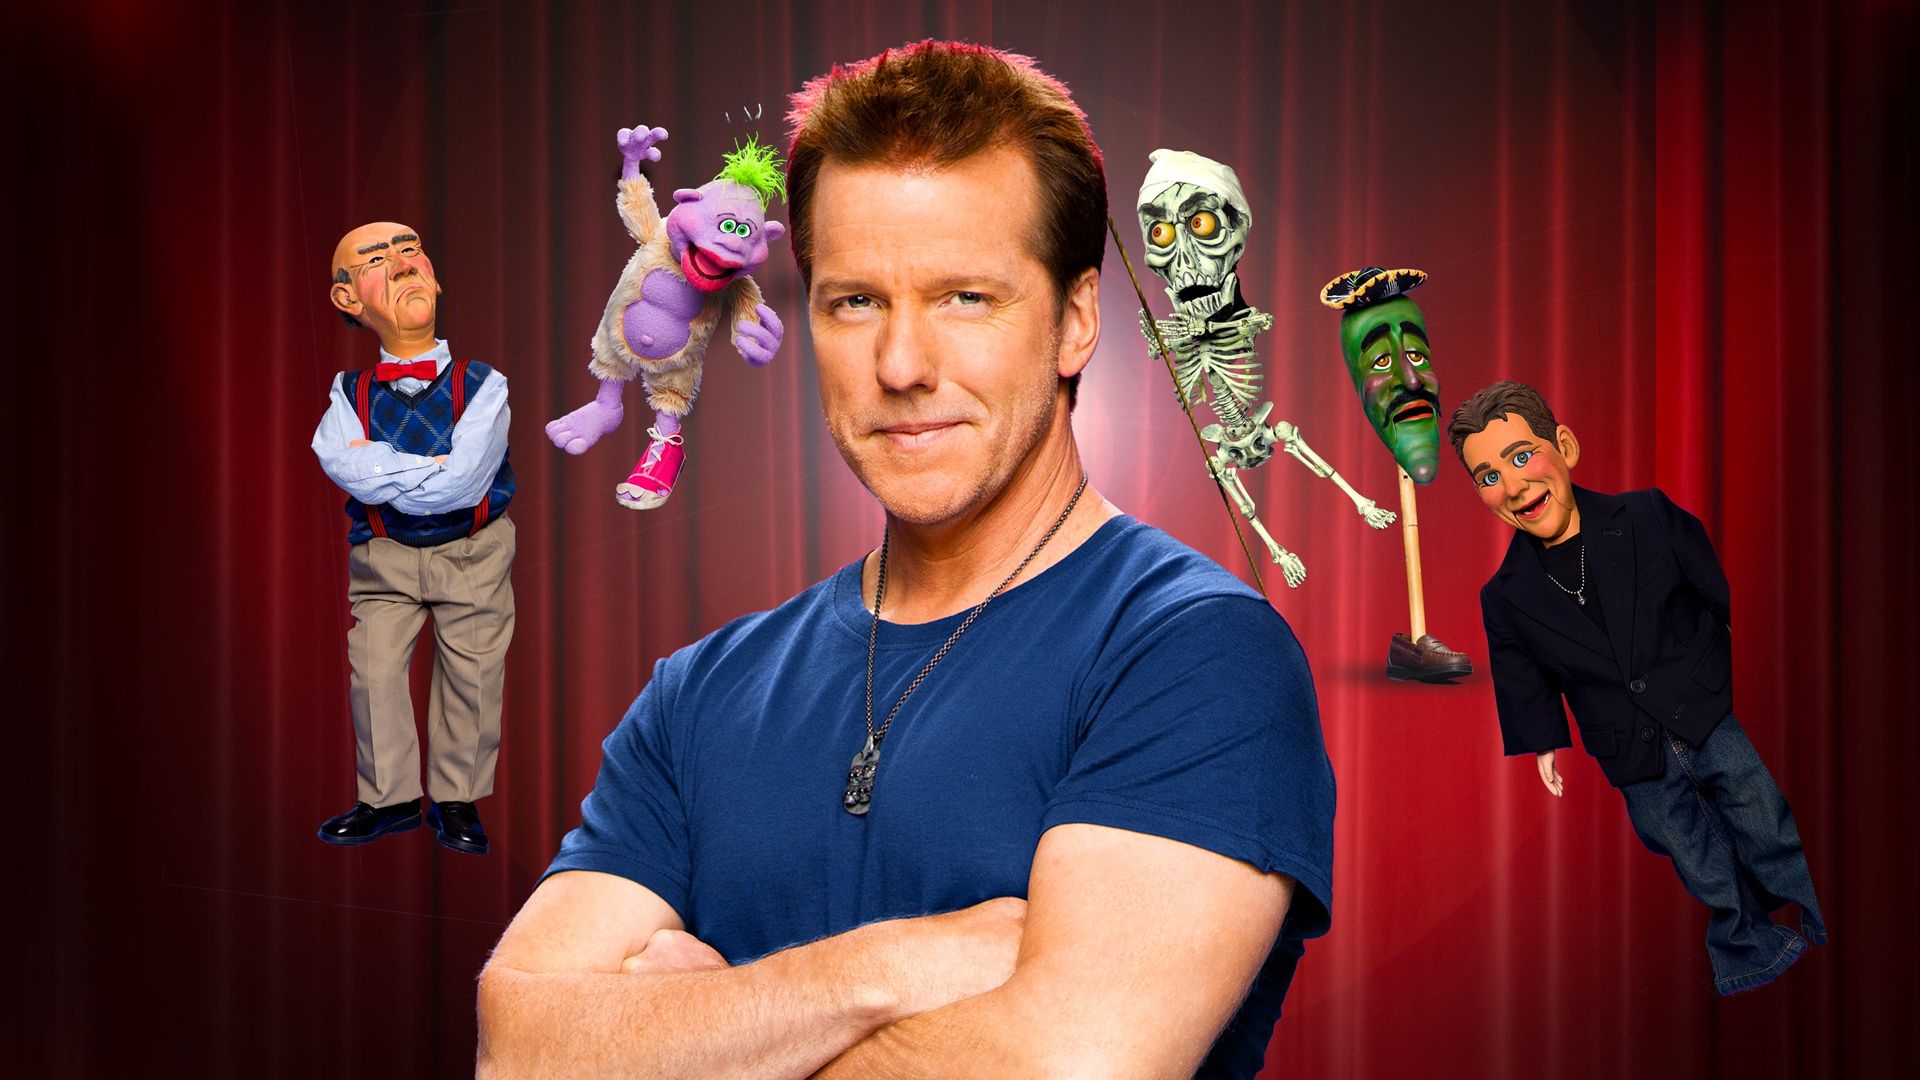 Jeff Dunham: Controlled Chaos background